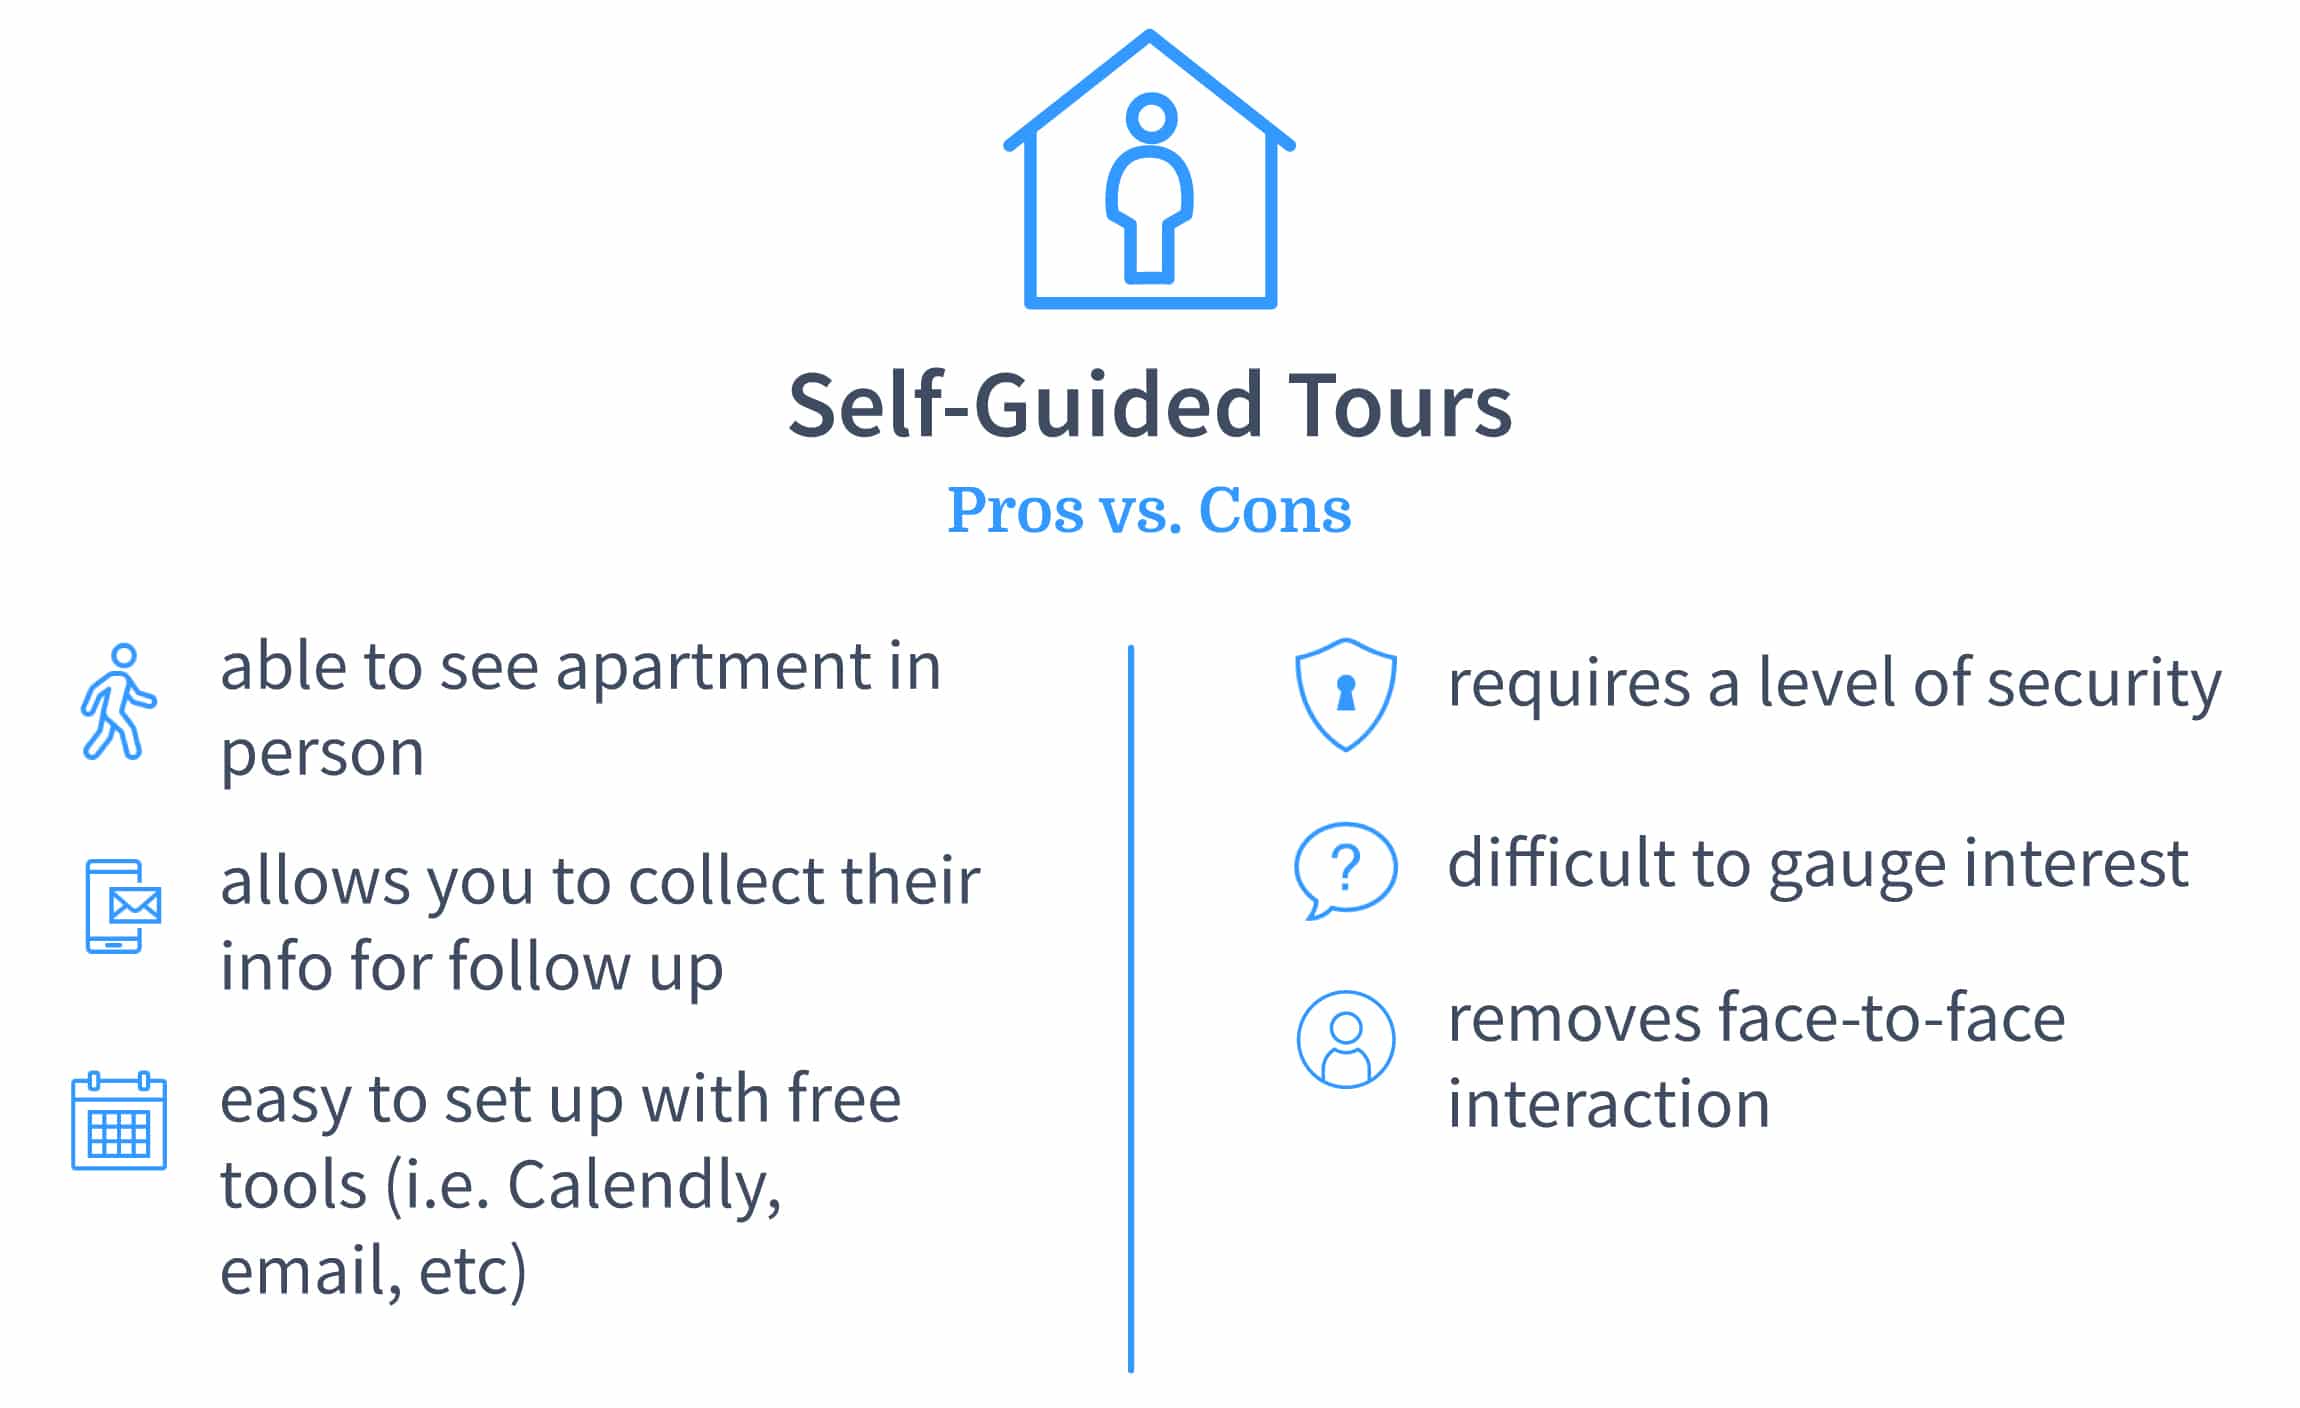 Self Guided Tours BlogGraphic 01 